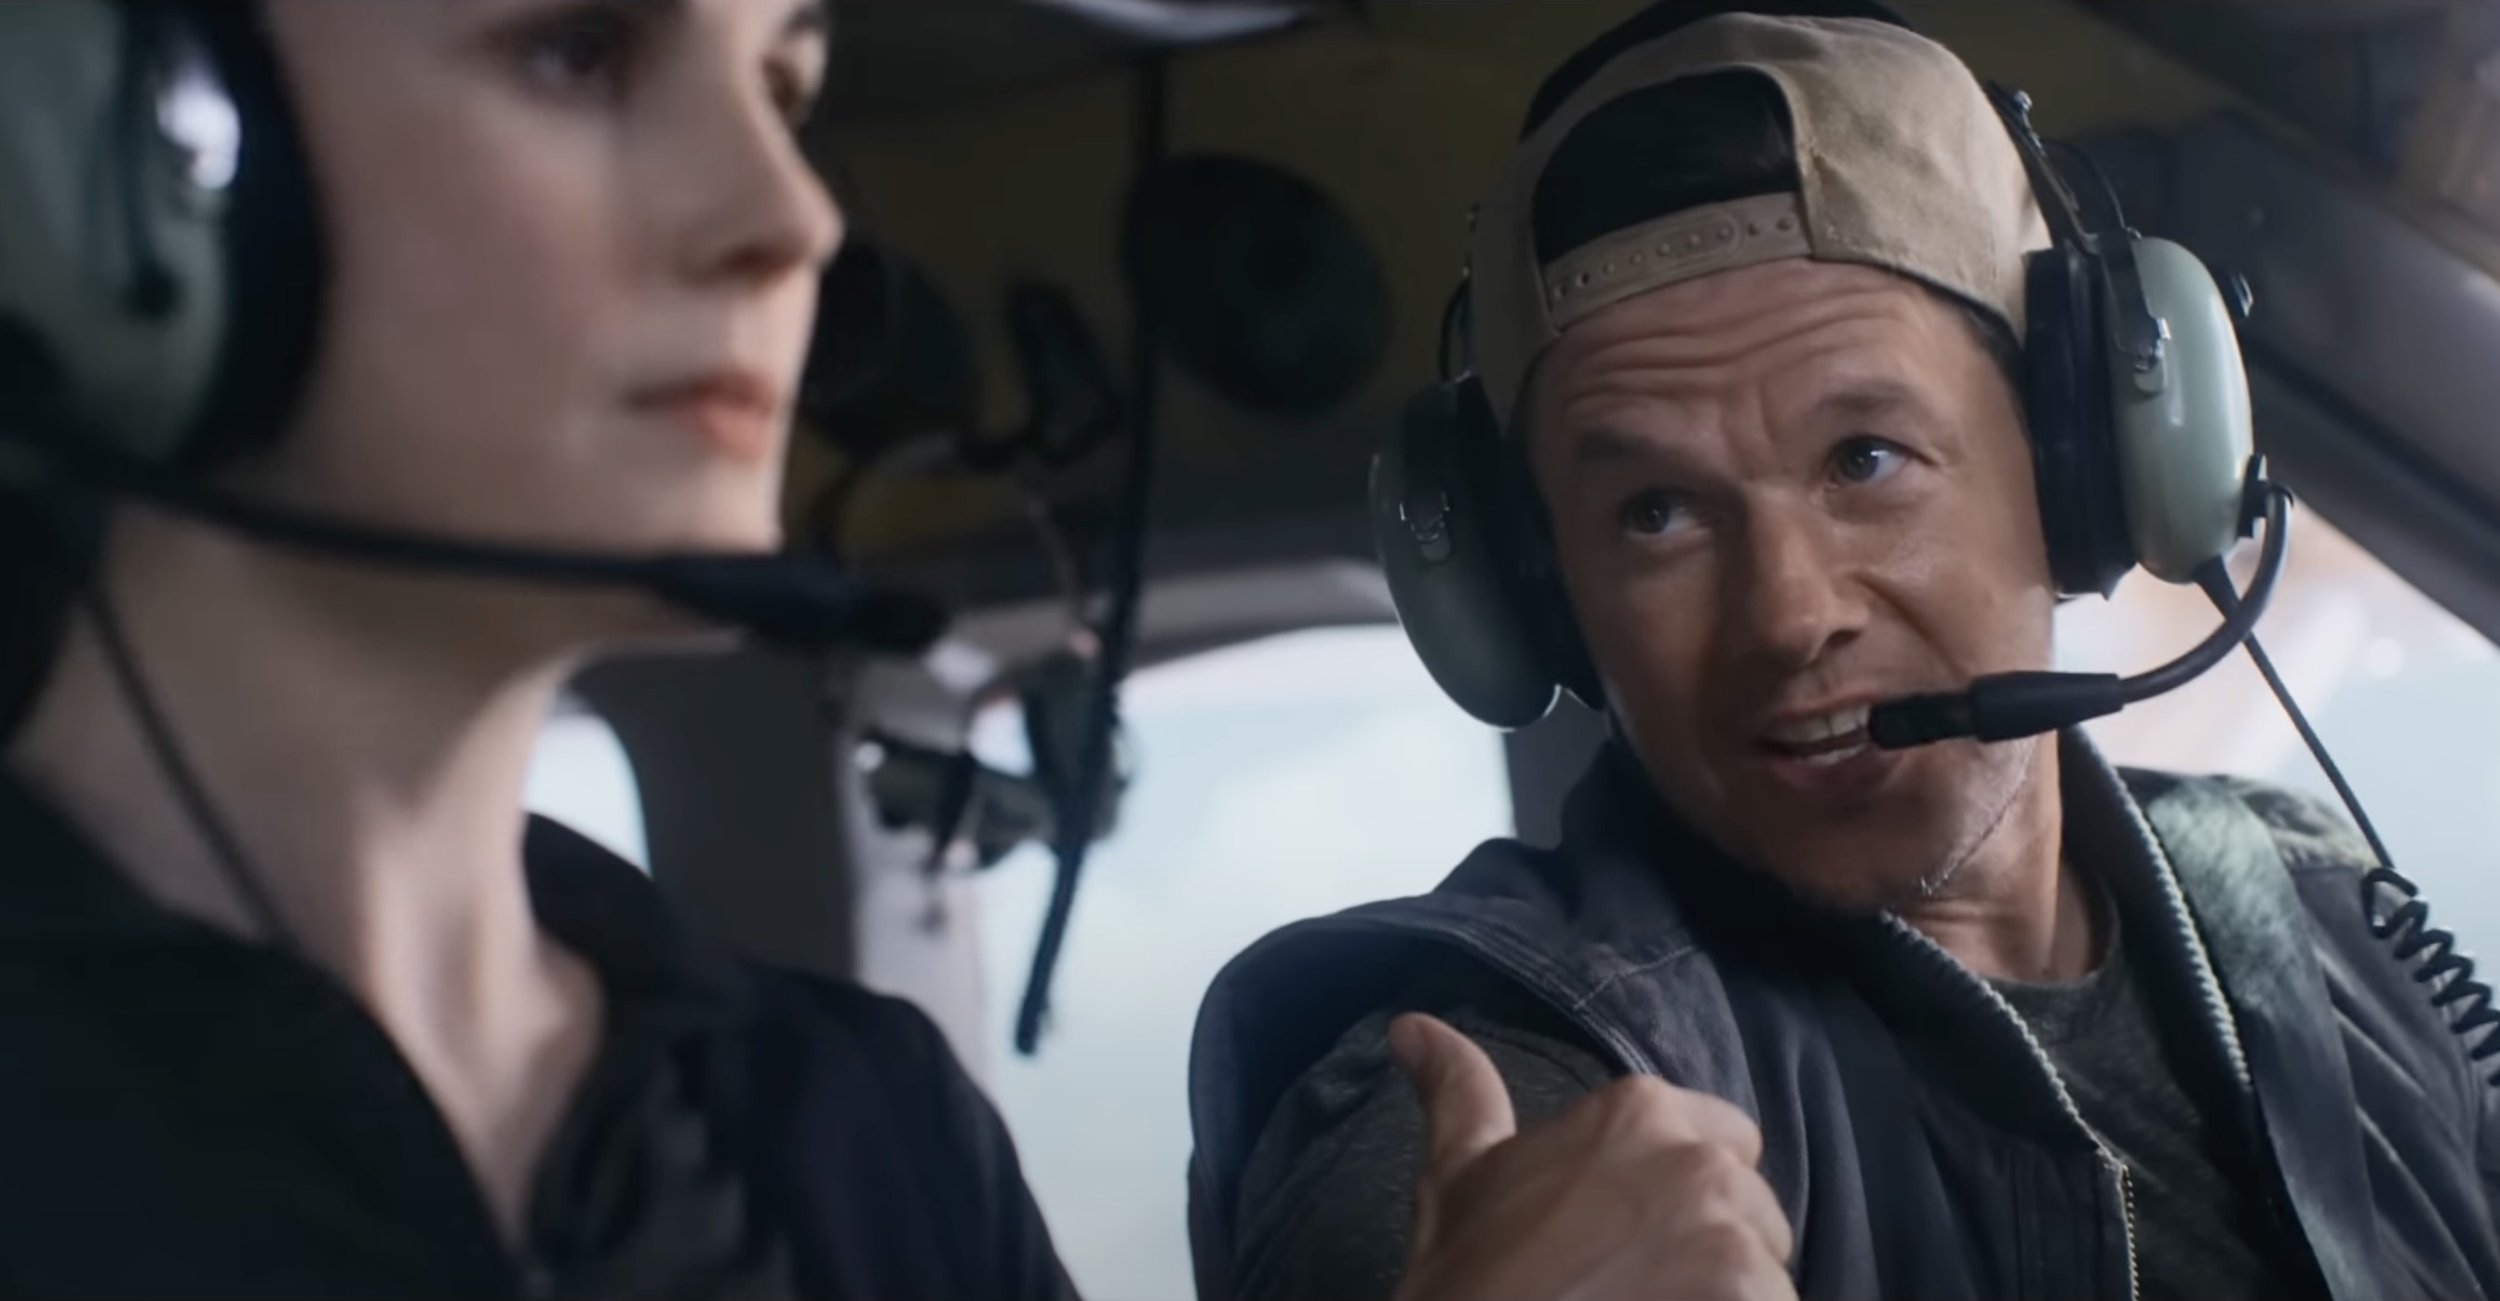 First Look at Flight Risk Trailer Featuring Mel Gibson and Mark Wahlberg